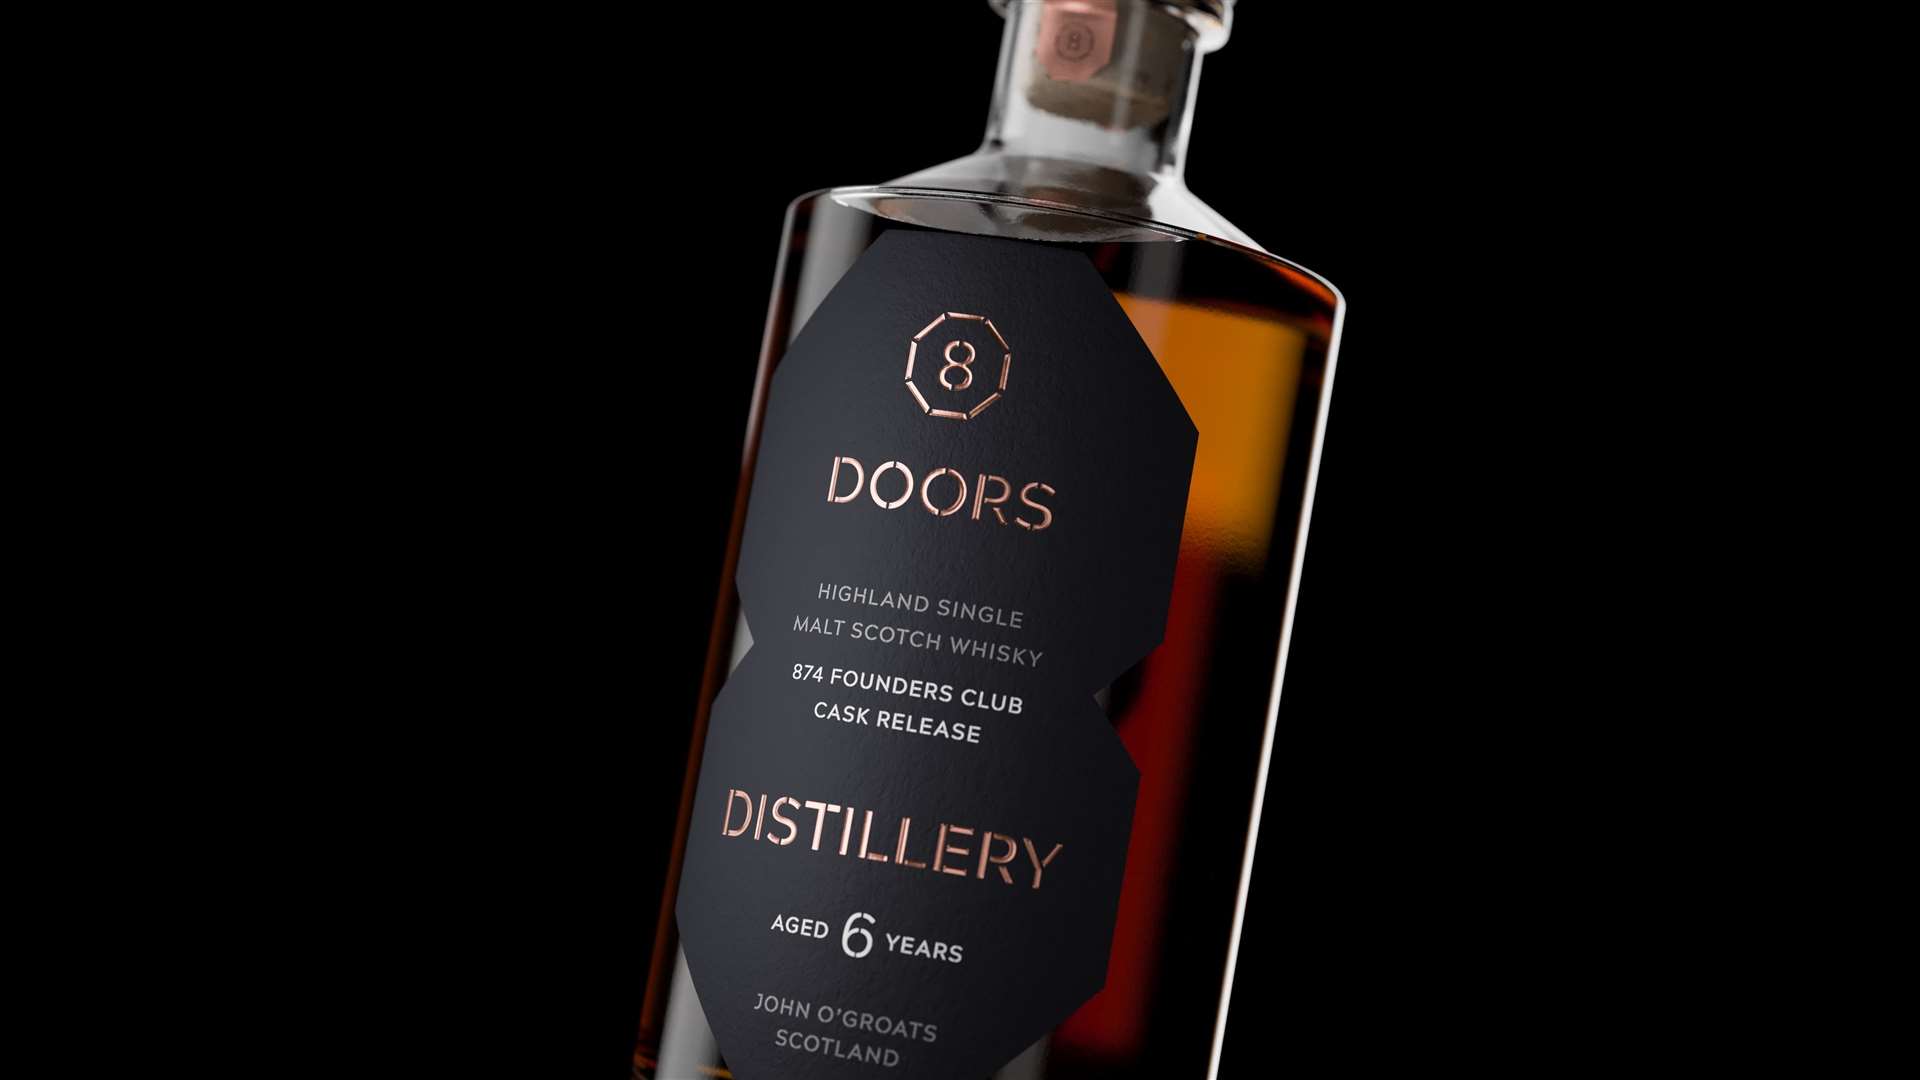 One of the first bottles from the new 8 Doors Distillery.